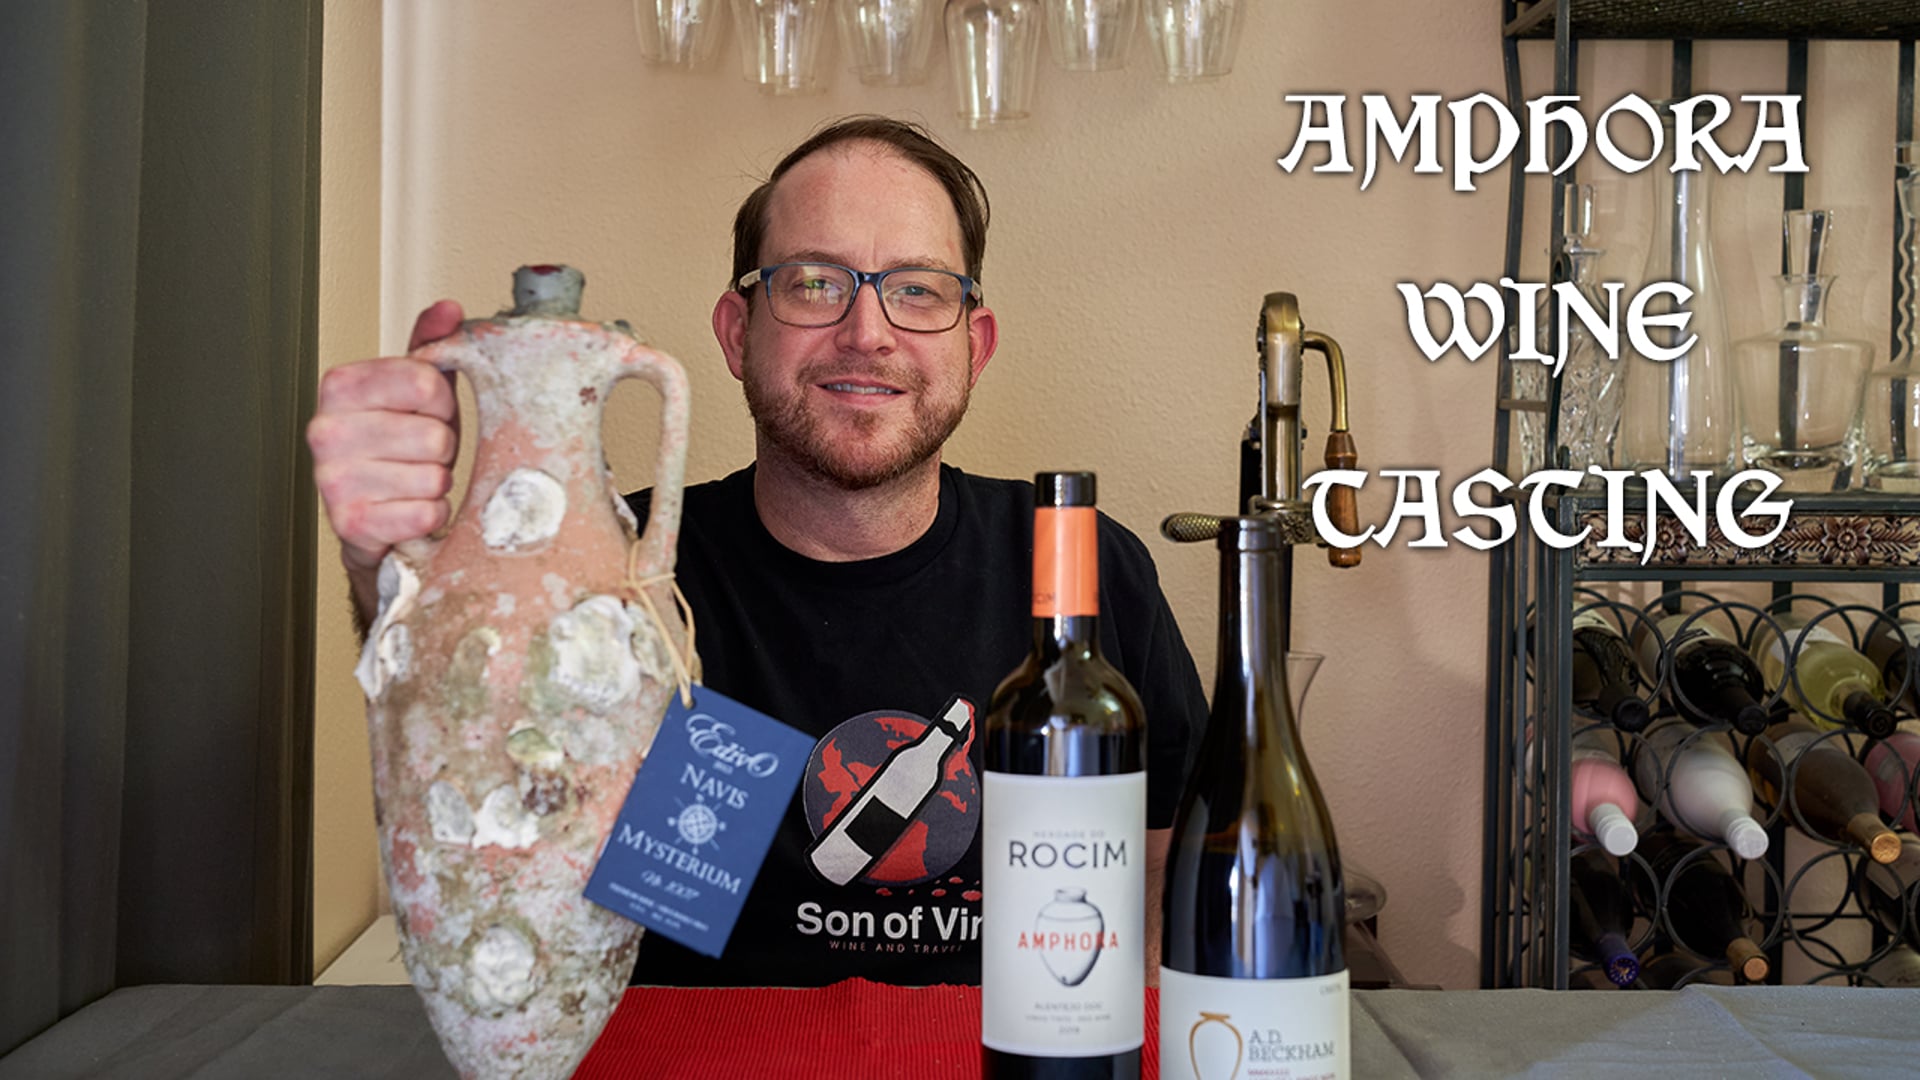 Watch Comparing Amphora wines from around the world on our Free Roku Channel